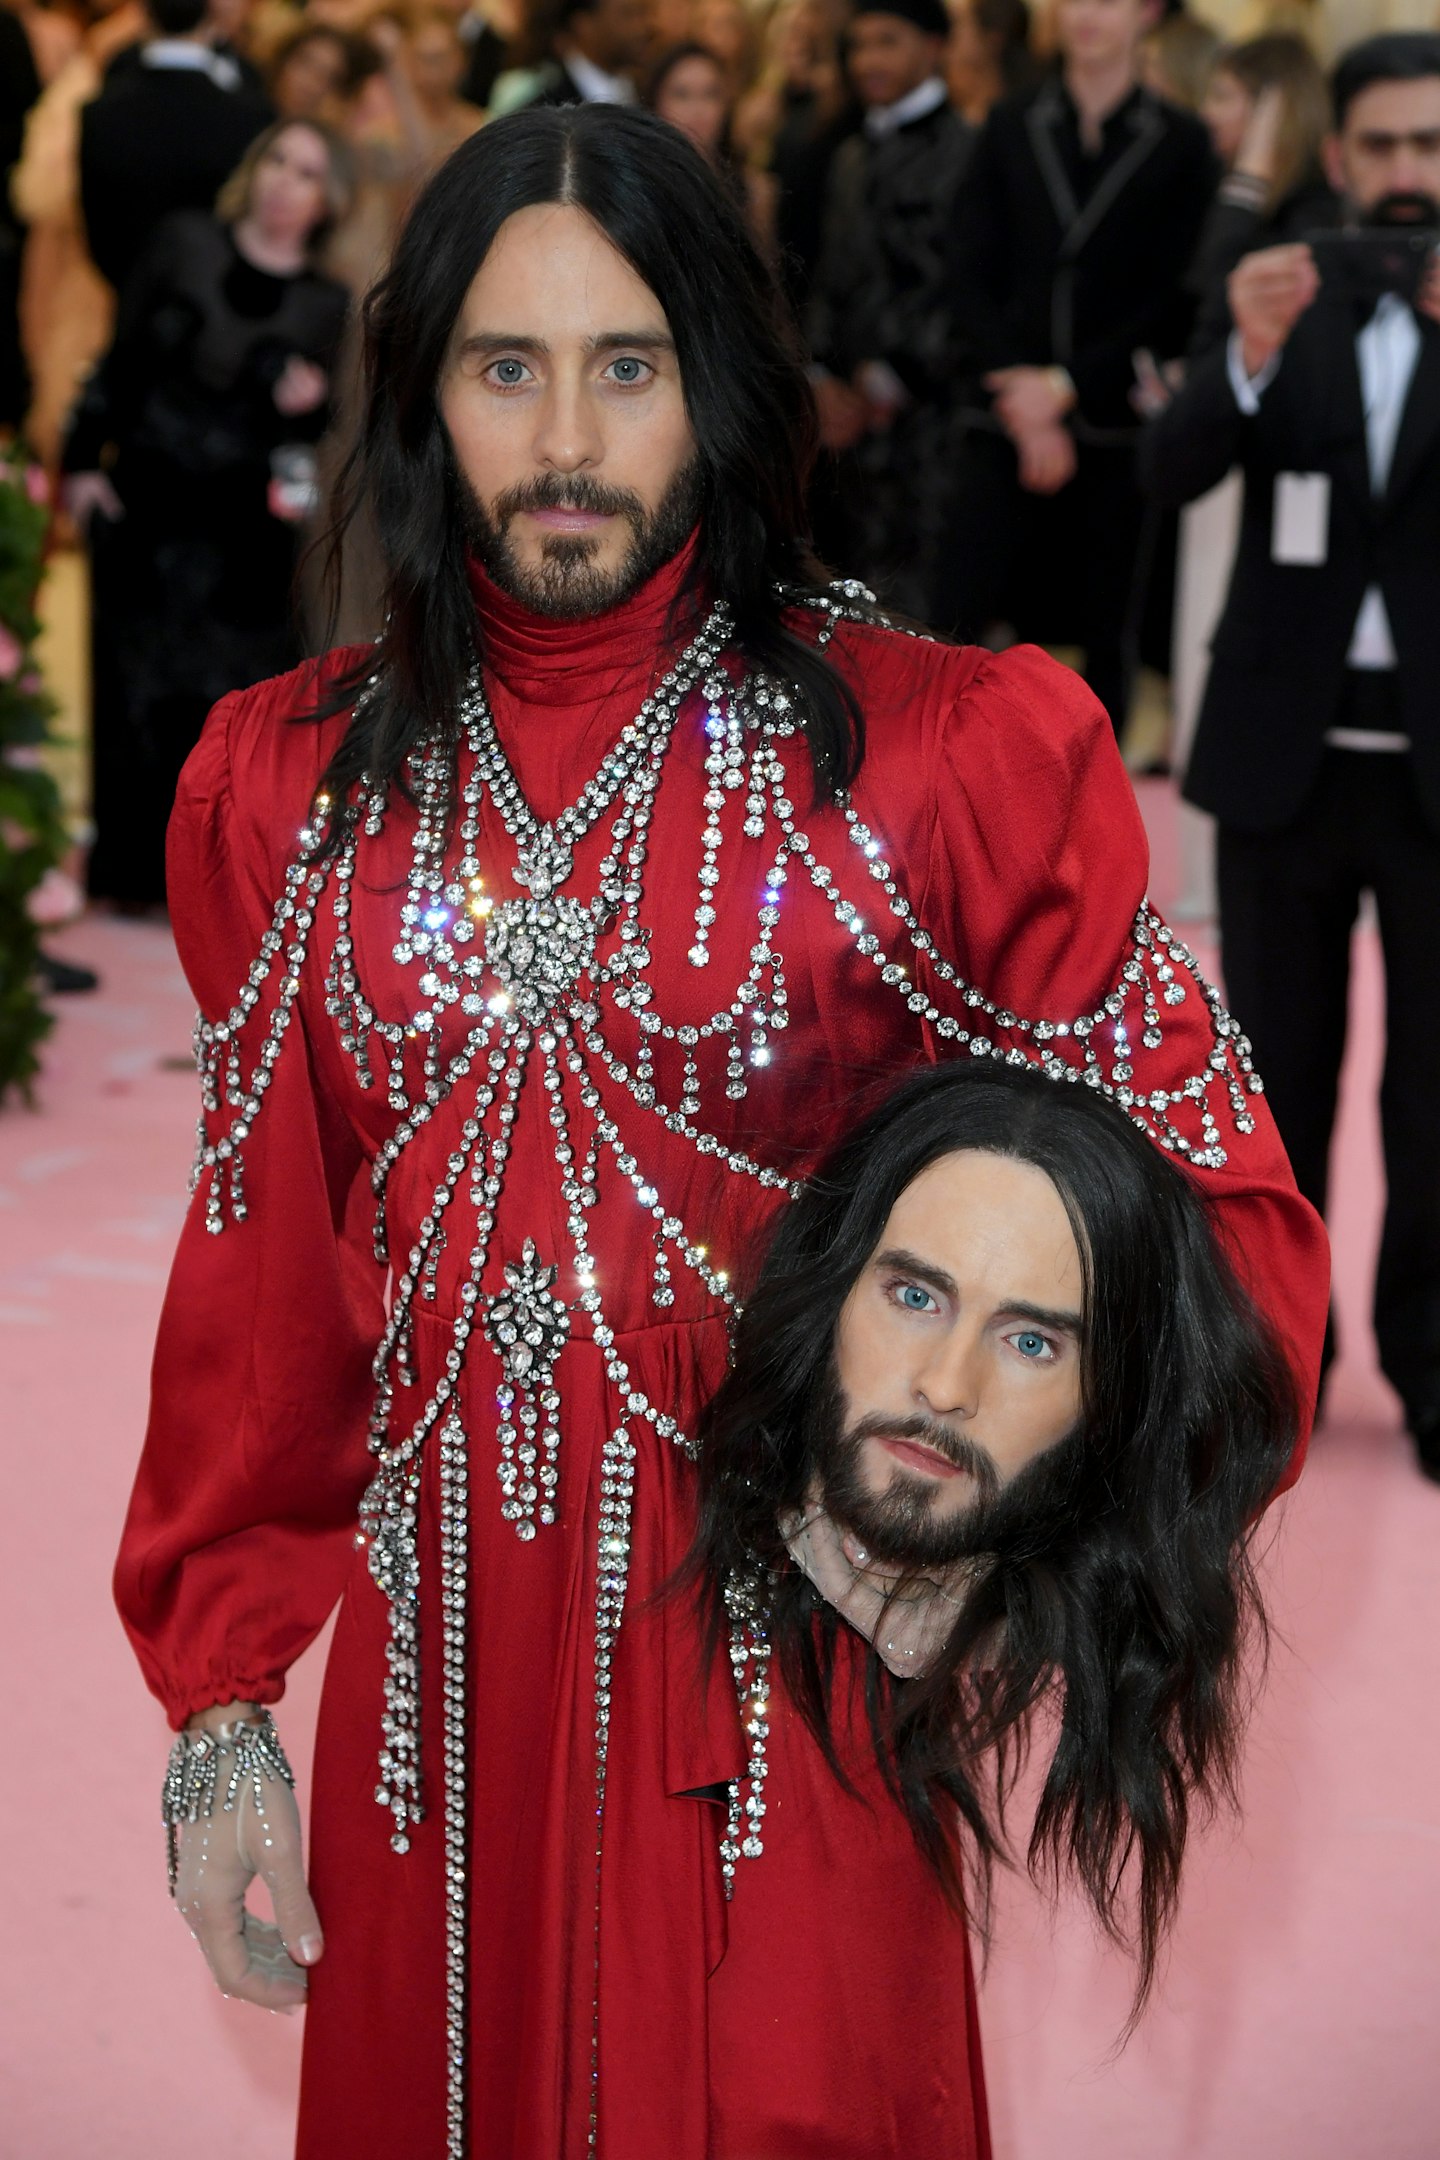 Jared Leto recreated a Gucci catwalk look, complete with a spare head